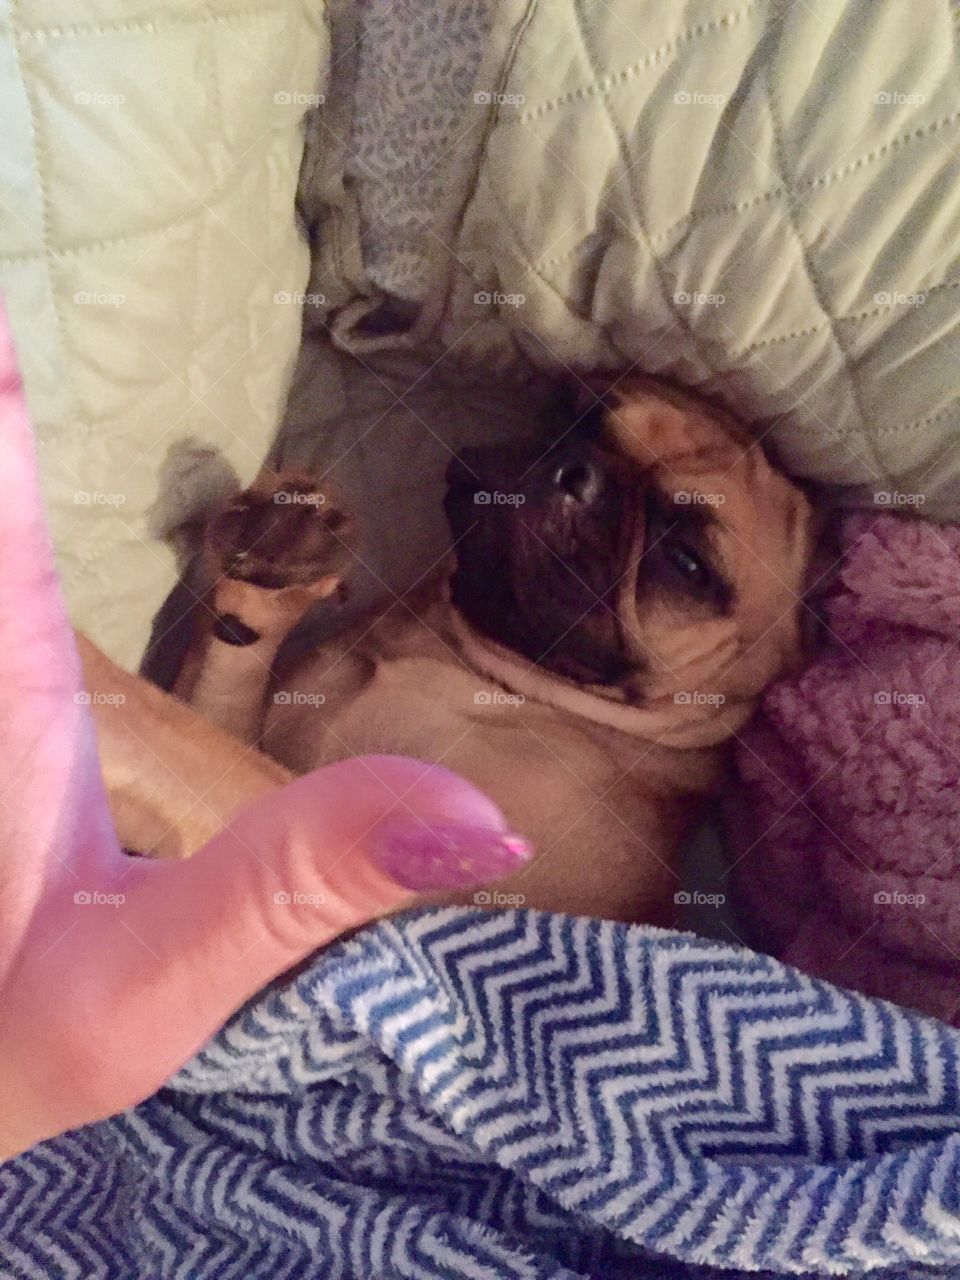 Giving mommy high five as I wake up